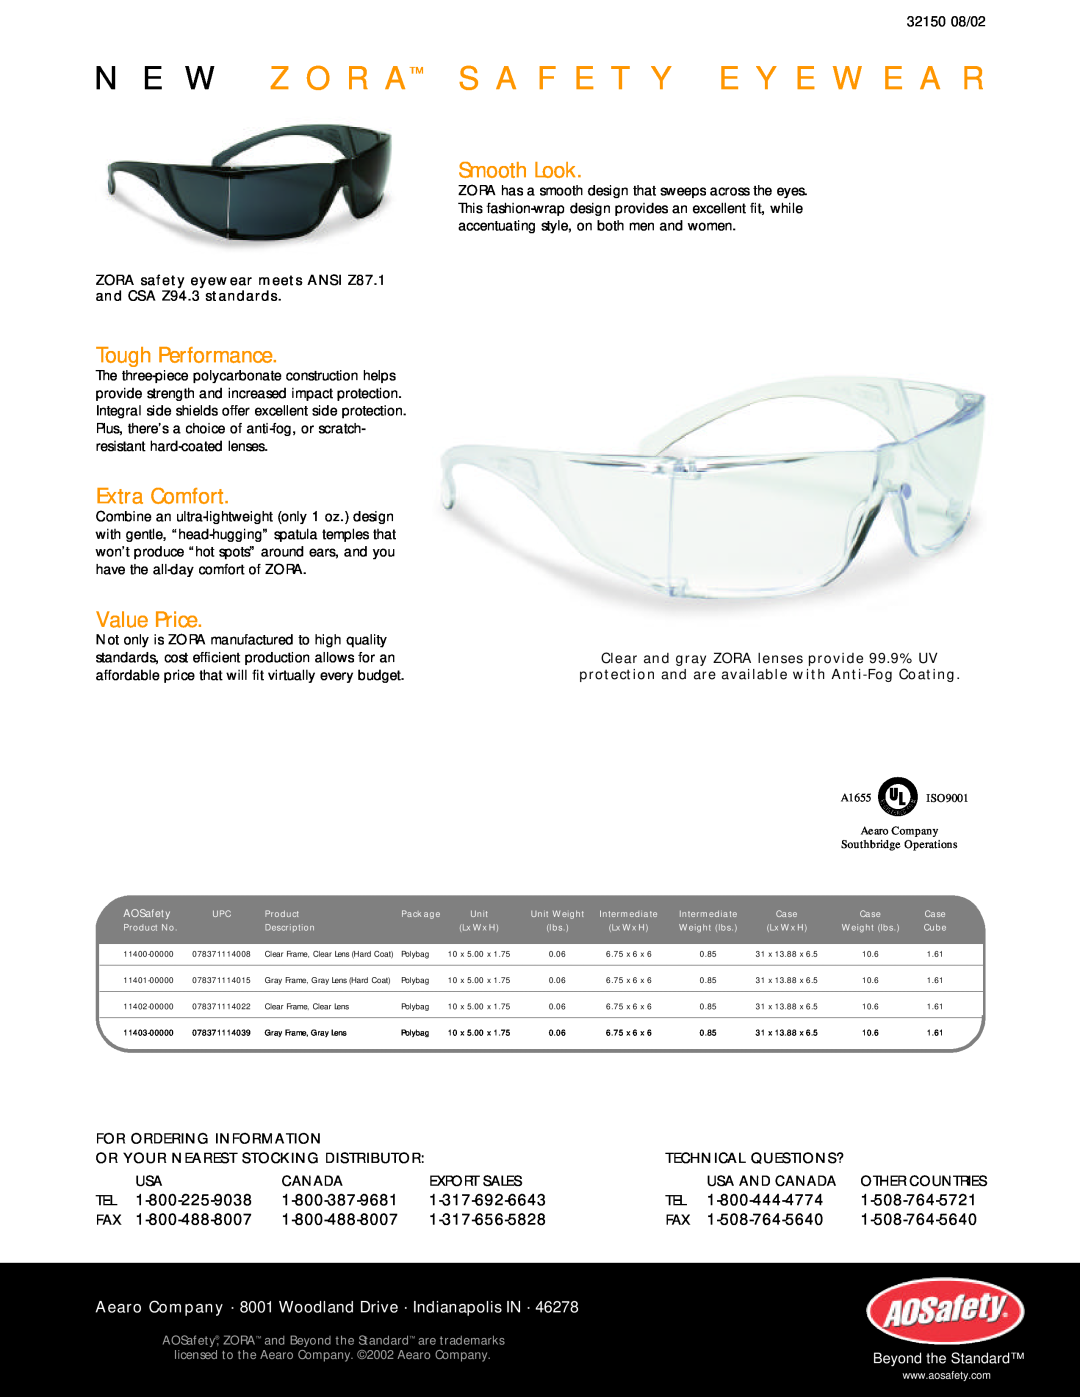 AOSafety Zora 32150 N E W Z O R A S A F E T Y E Y E W E A R, Smooth Look, Tough Performance, Extra Comfort, Value Price 